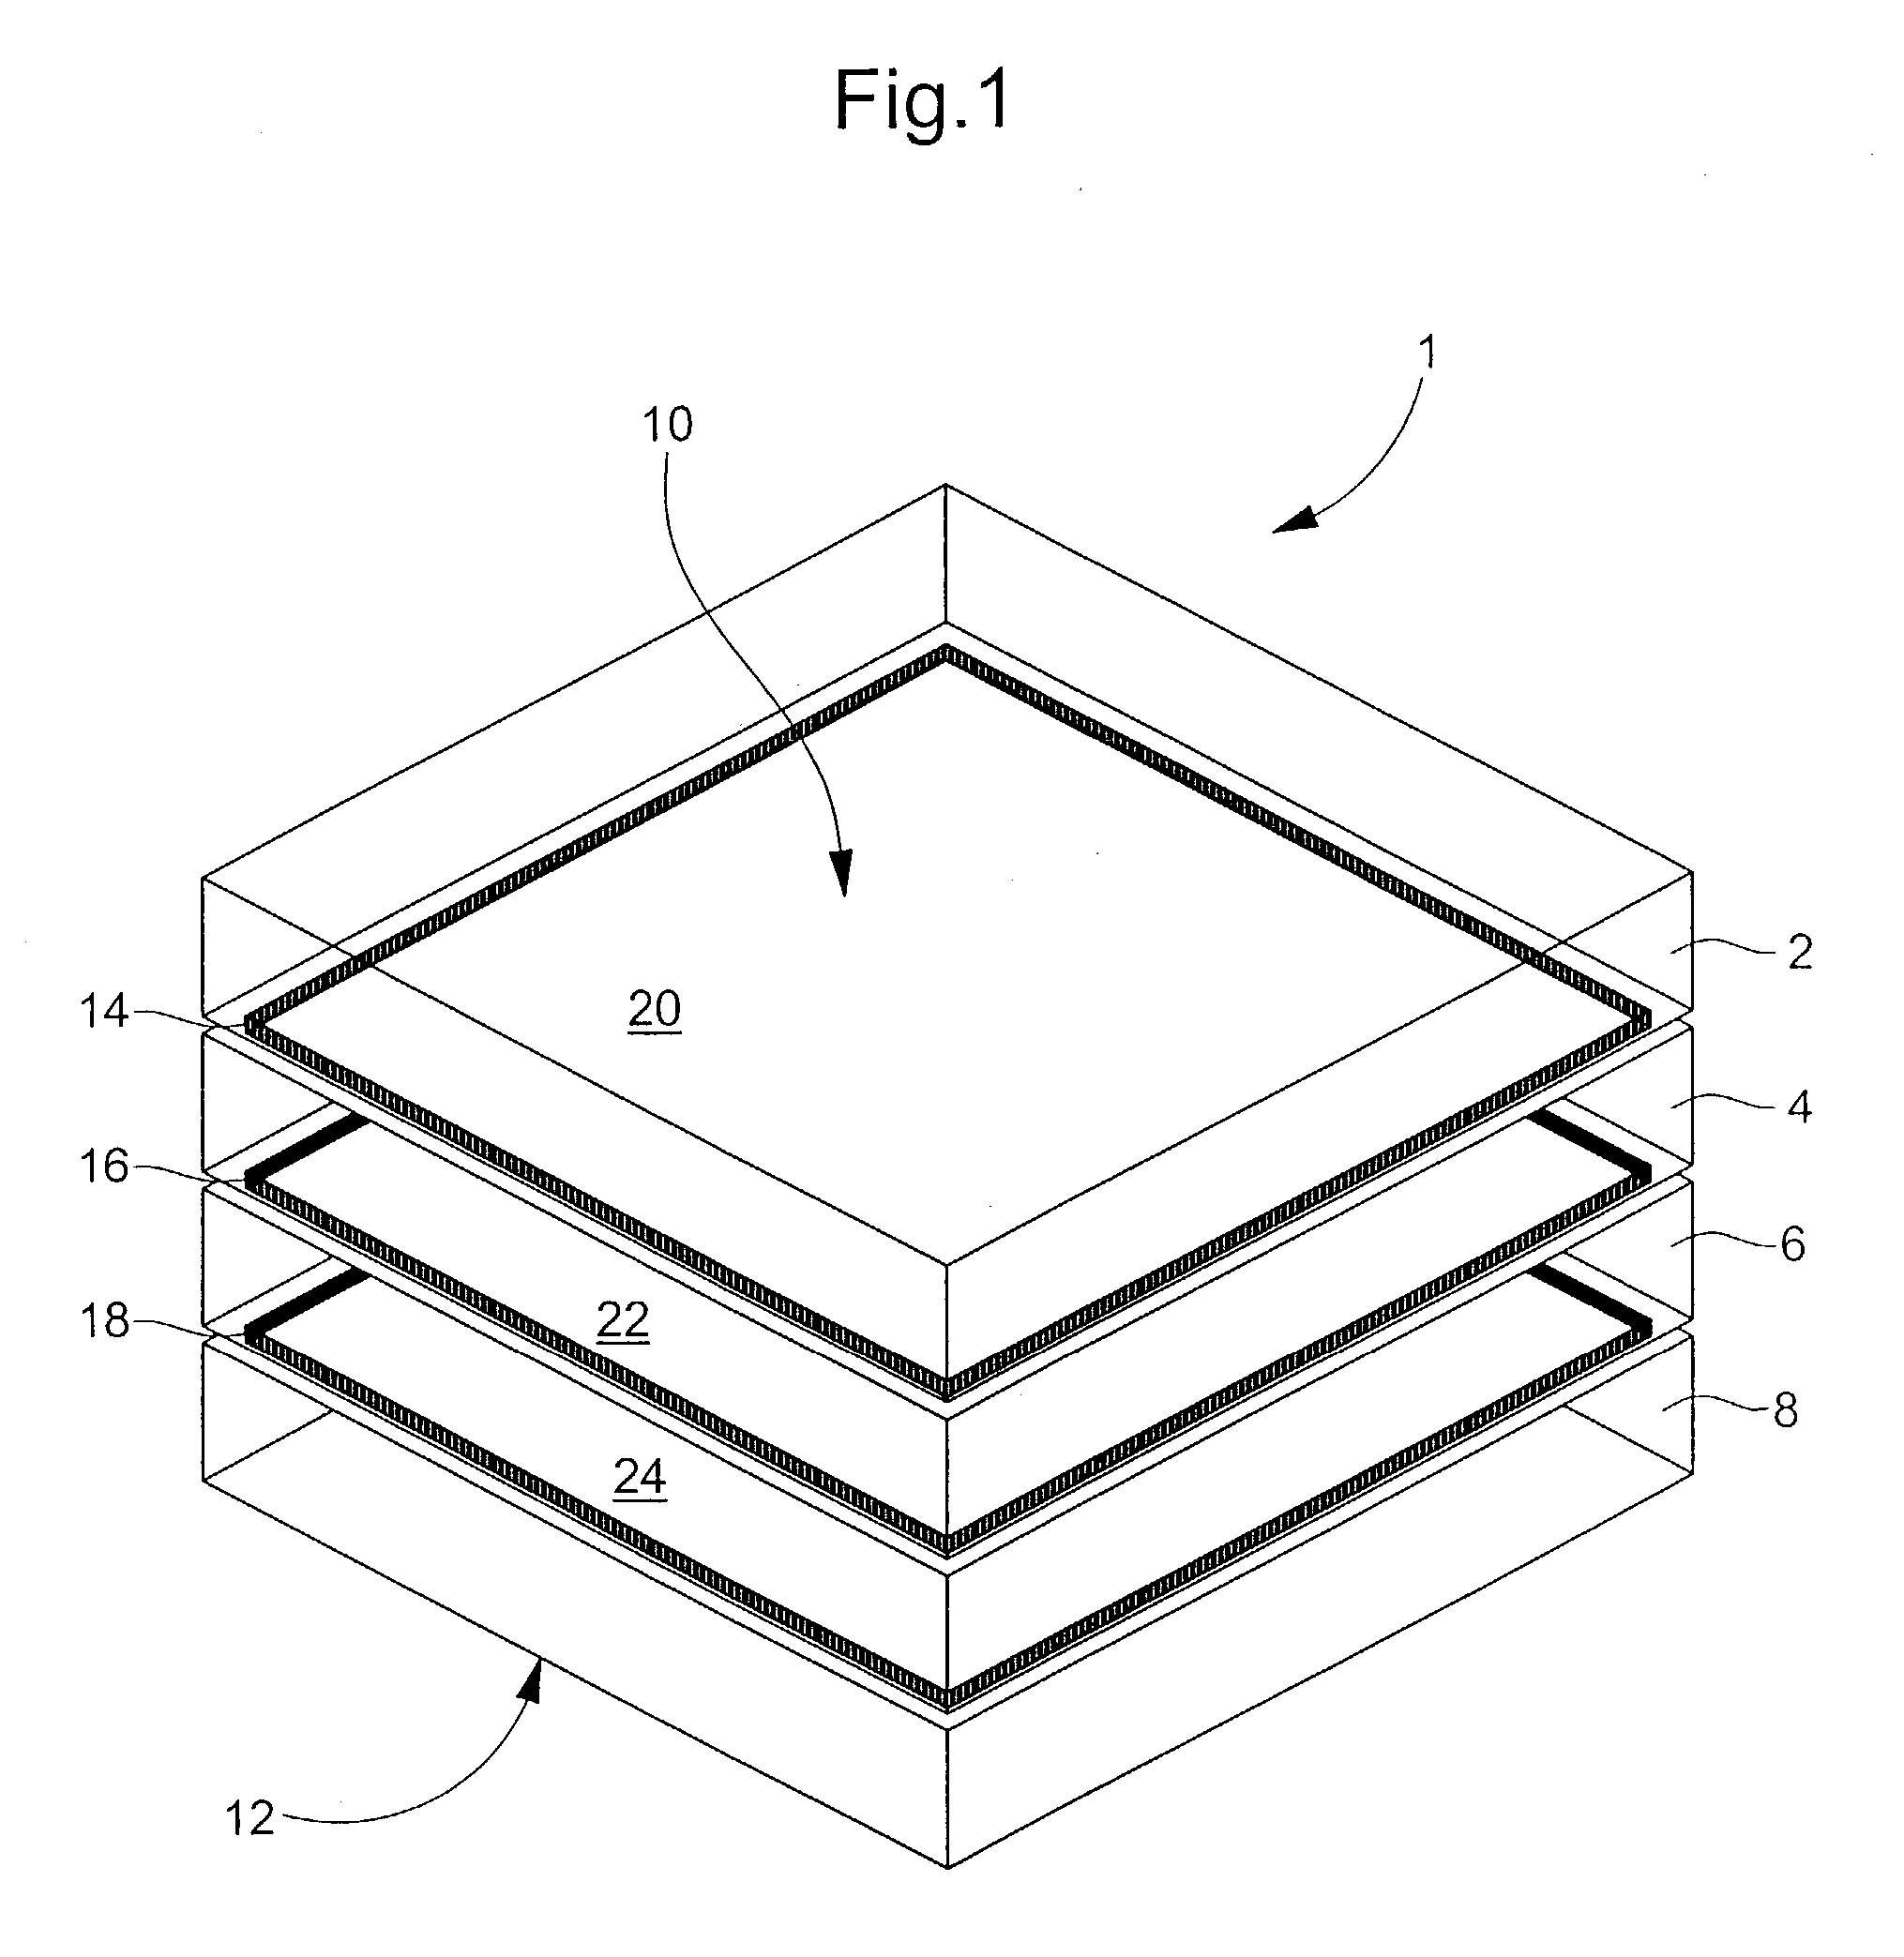 Method for manufacturing a batch of multi-layered cells, such as liquid crystal display cells, or electrochemical photovoltaic cells